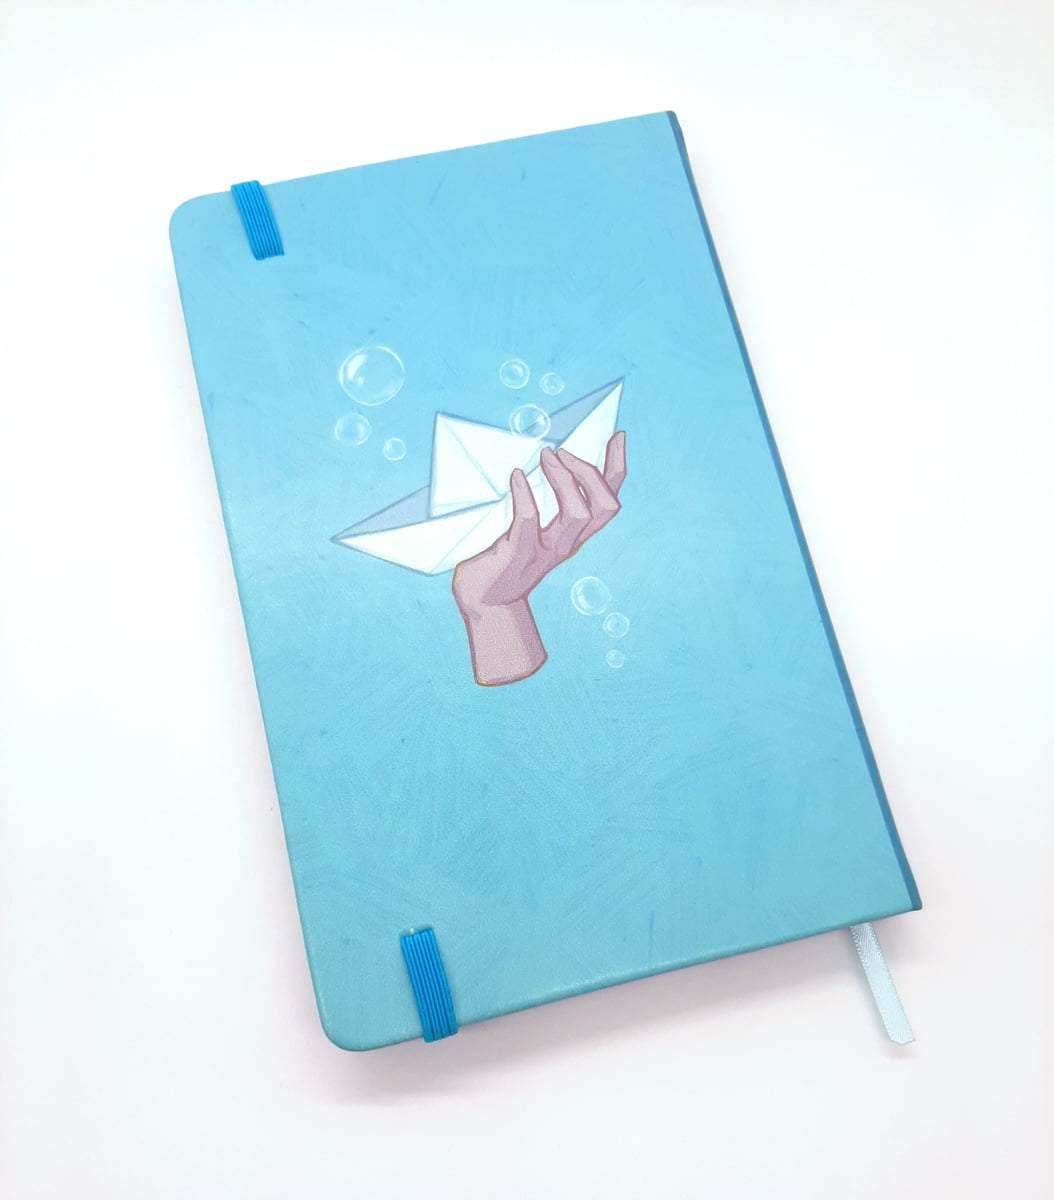 Swimming Thoughts Hardcover Journal [Blank] - Art of Tangmo